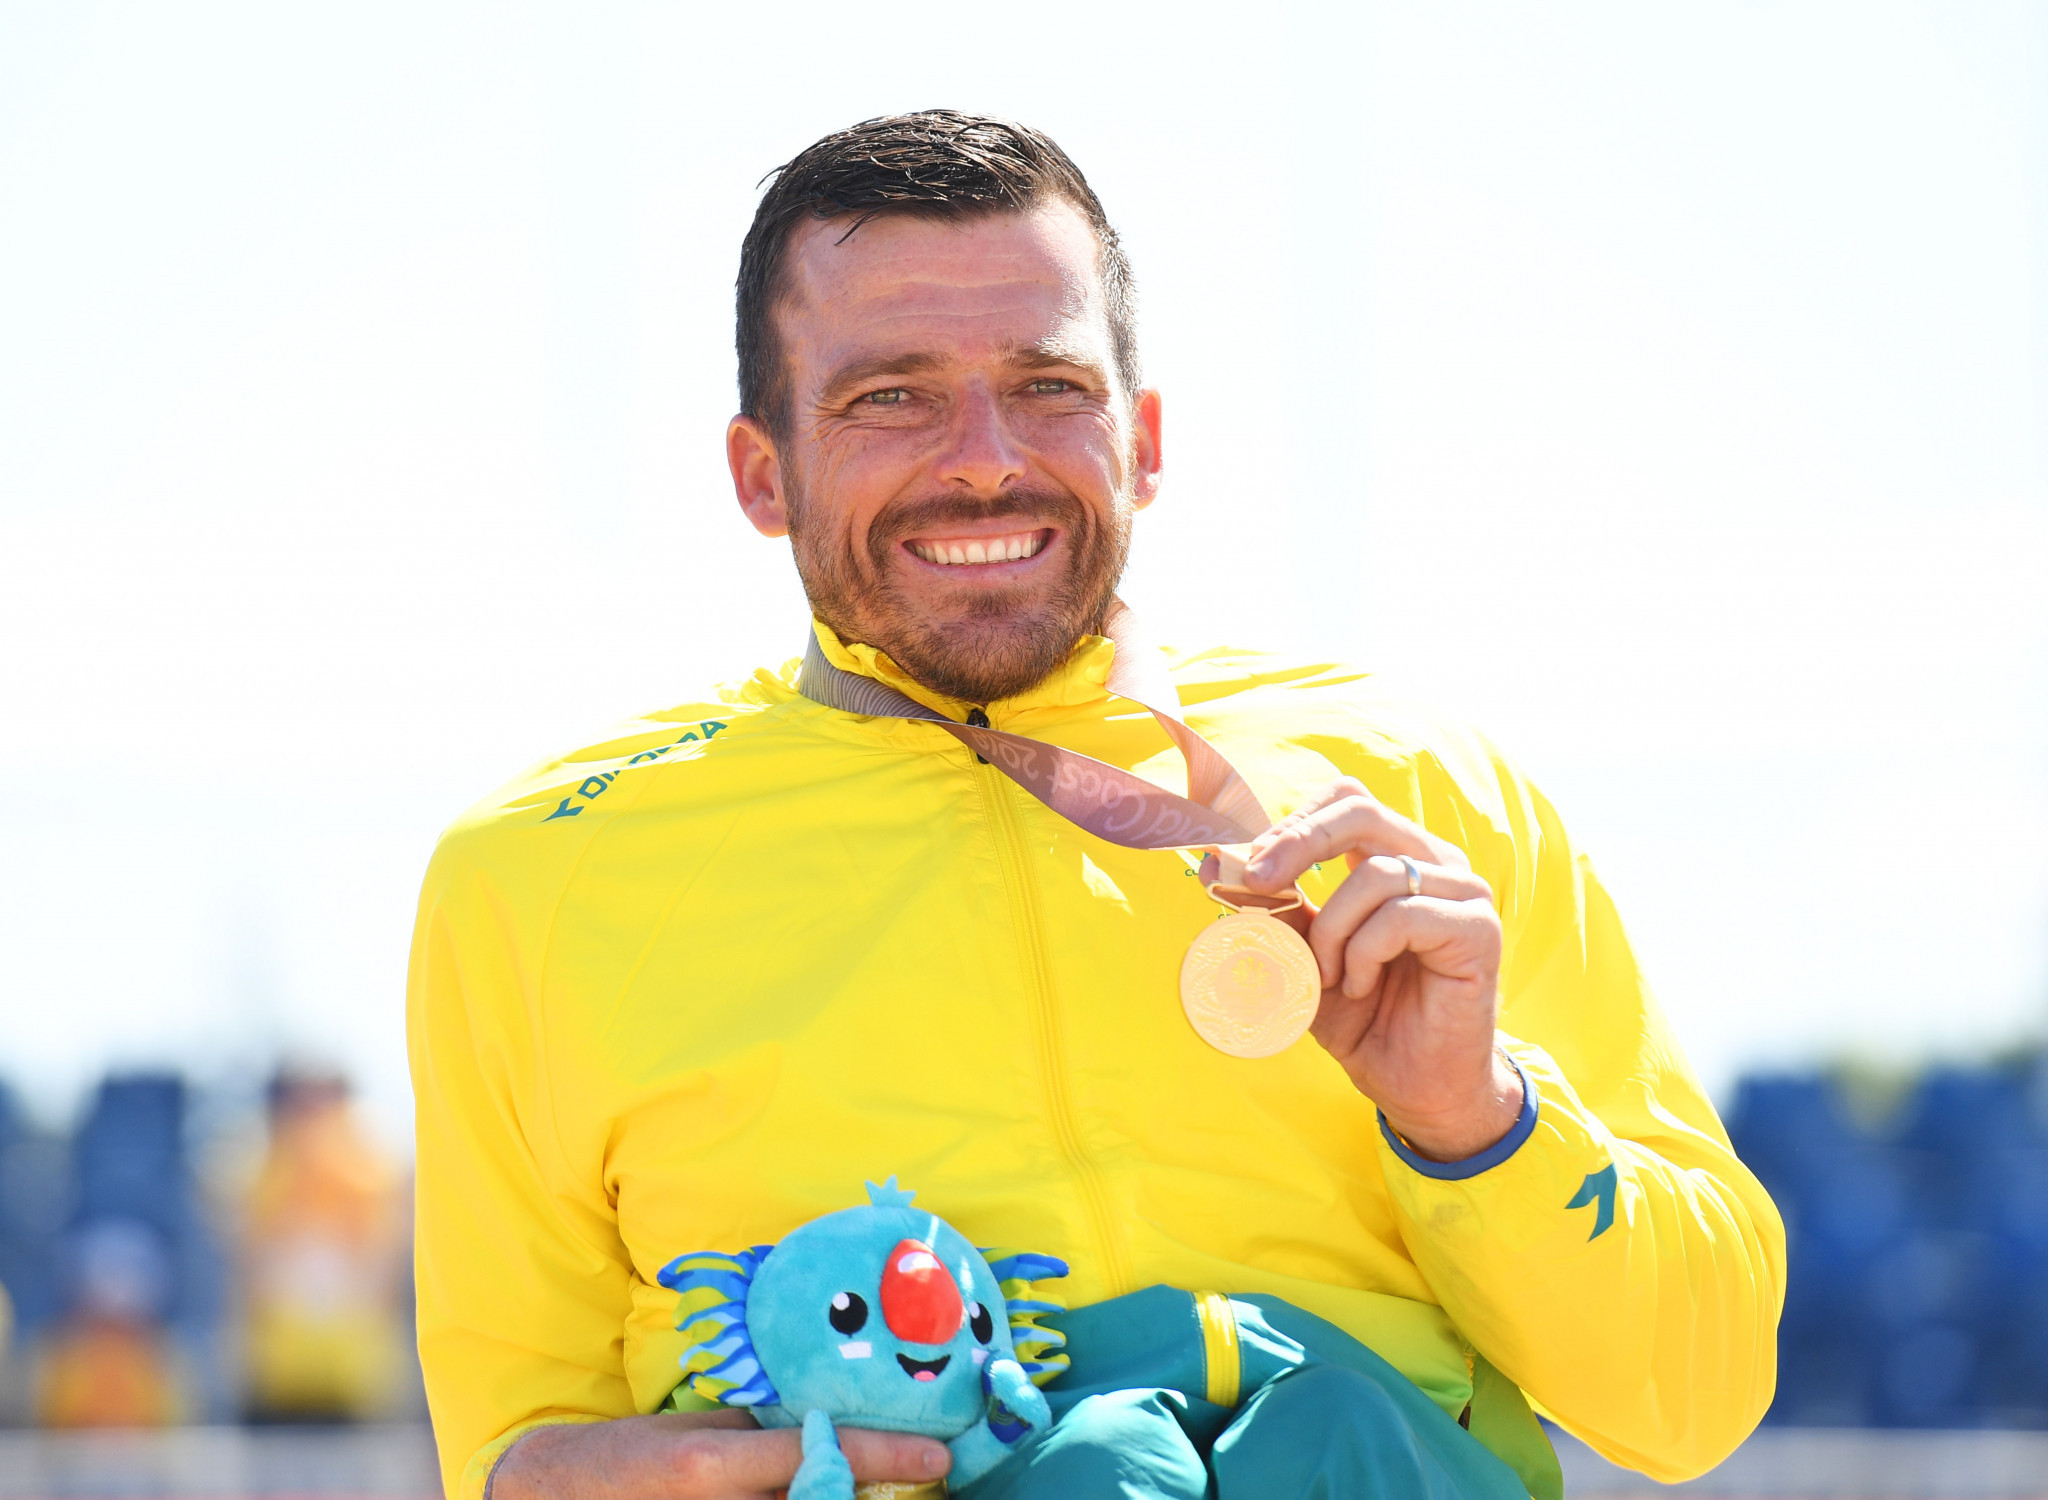 Kurt Fearnley has been elected as the new vice-chairperson of the IPC Athletes' Council ©Getty Images